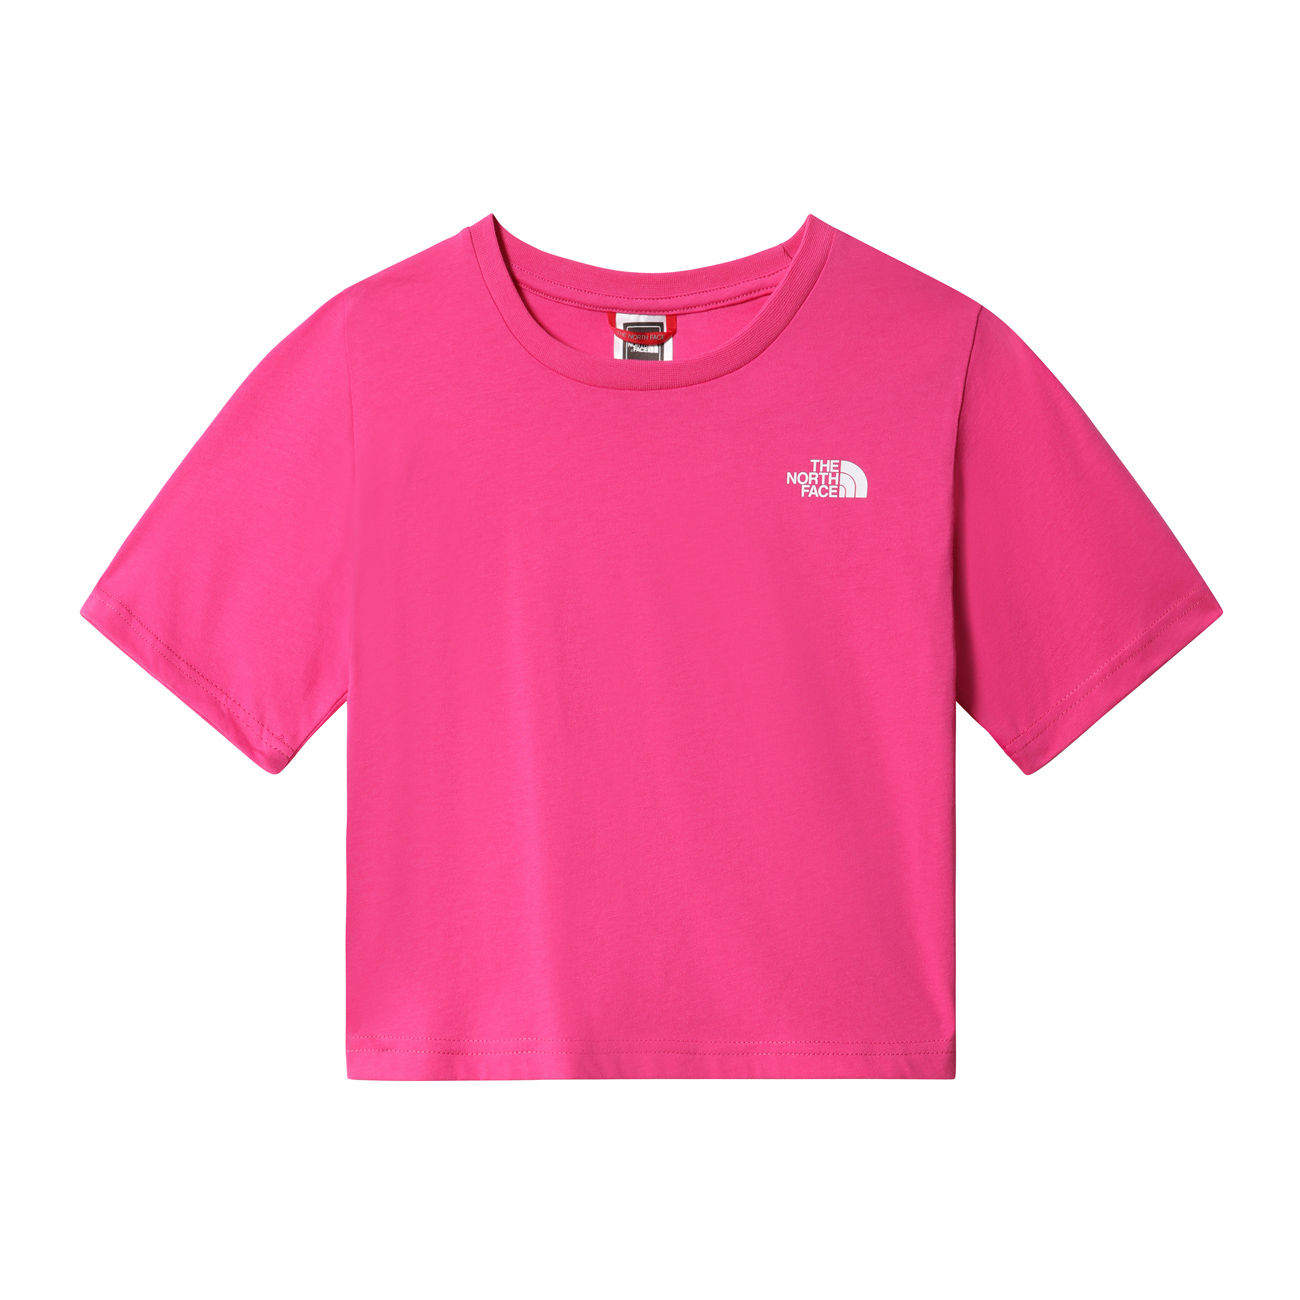 NORTH DOME T-SHIRT Store CROPPED | FACE Mascheroni Pink THE SIMPLE Kid Linaria